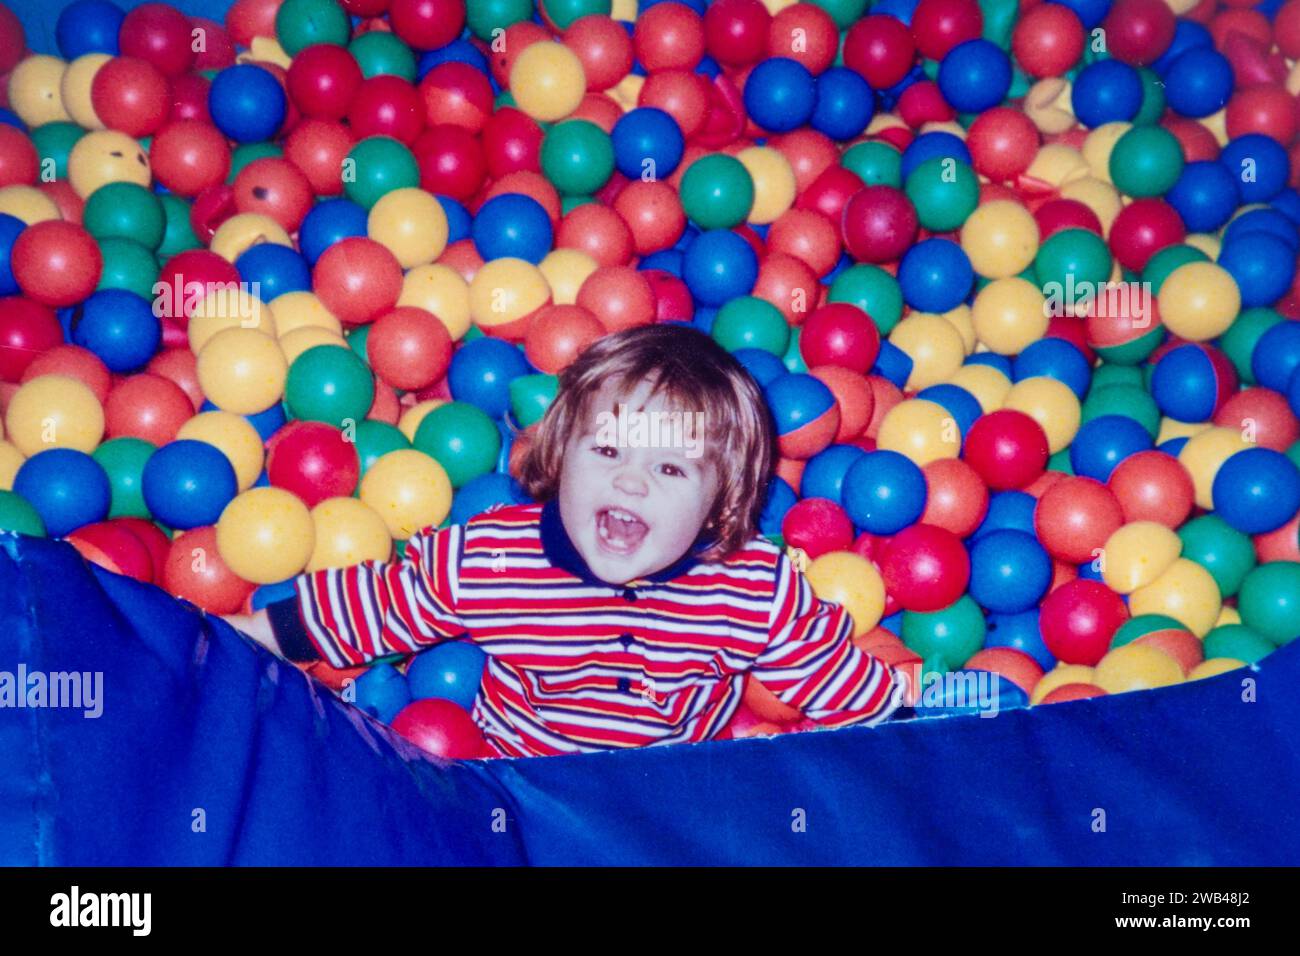 Archival photo from 1994. Young girl child toddler playing in ball pit, having fun playing with colourful balls. Stock Photo